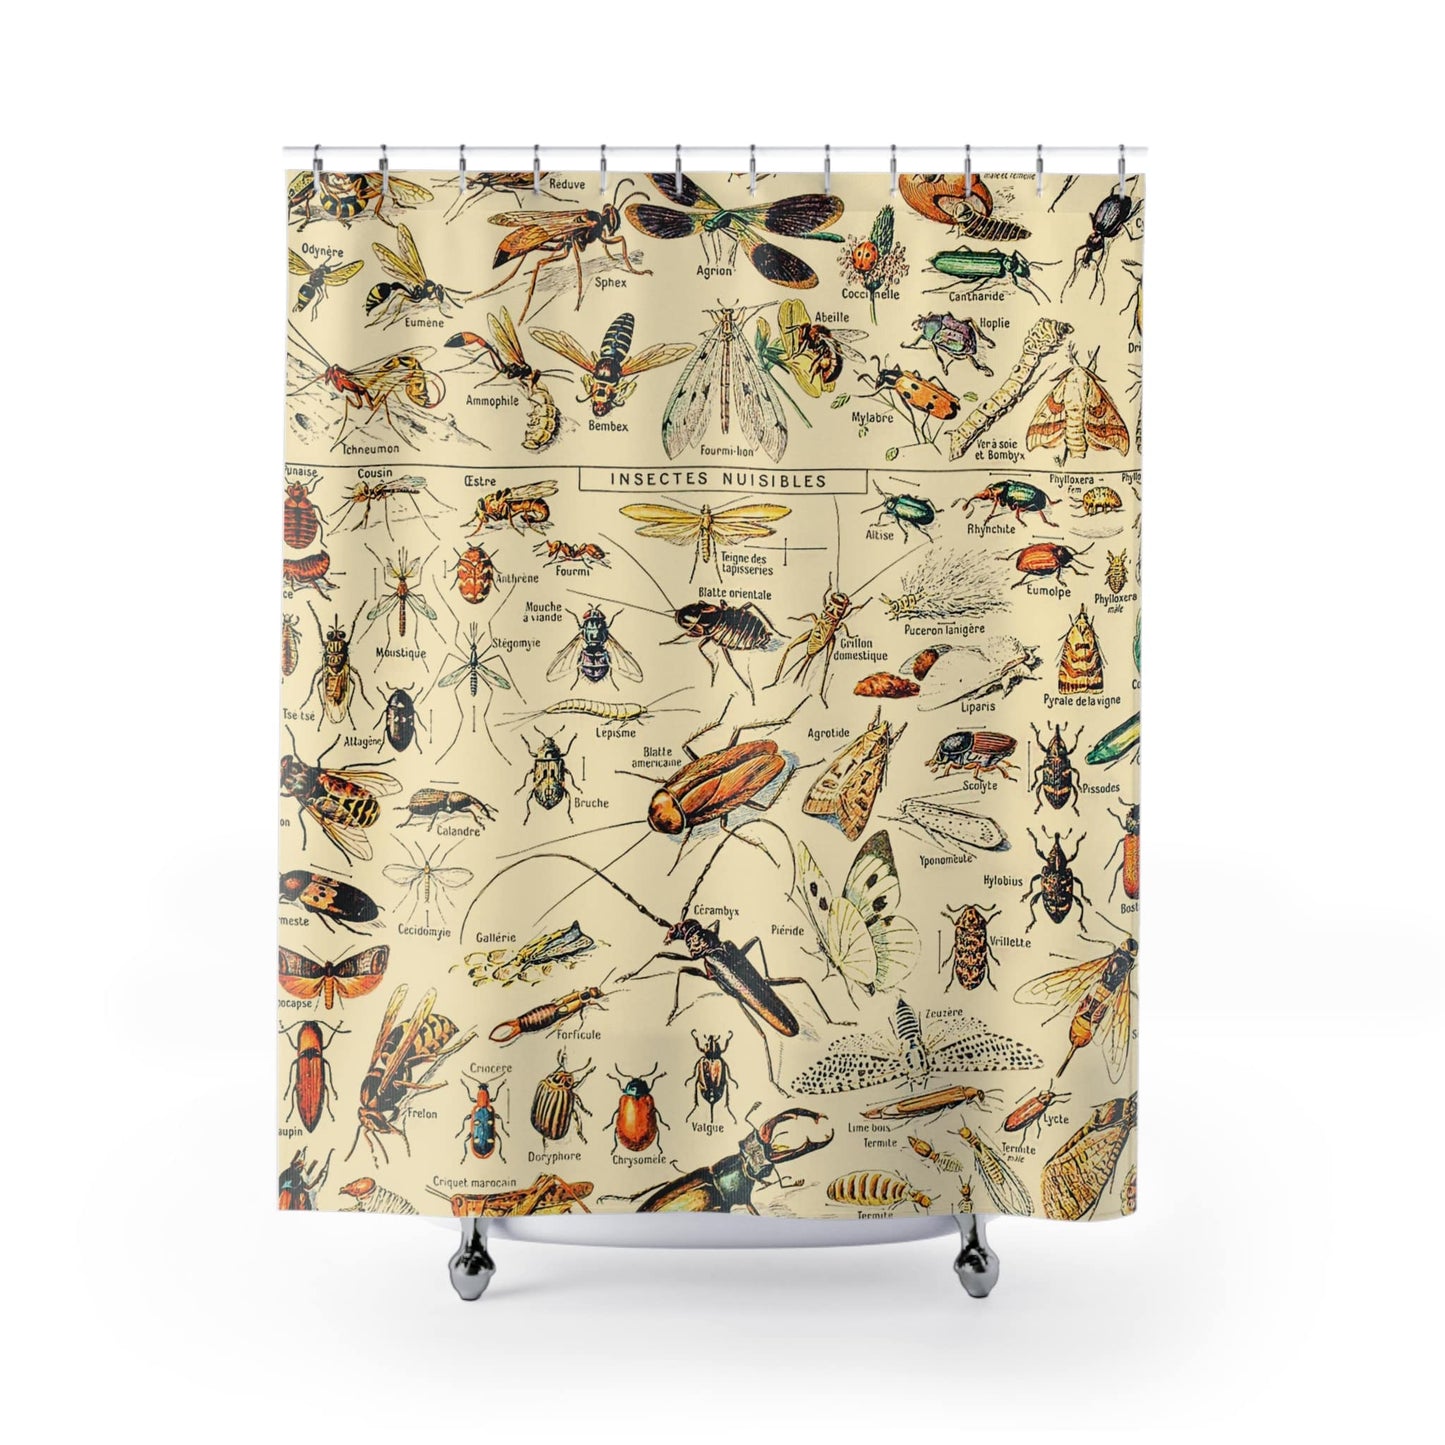 Bugs and Insects Shower Curtain with insect identification design, informative bathroom decor showcasing insect identification art.